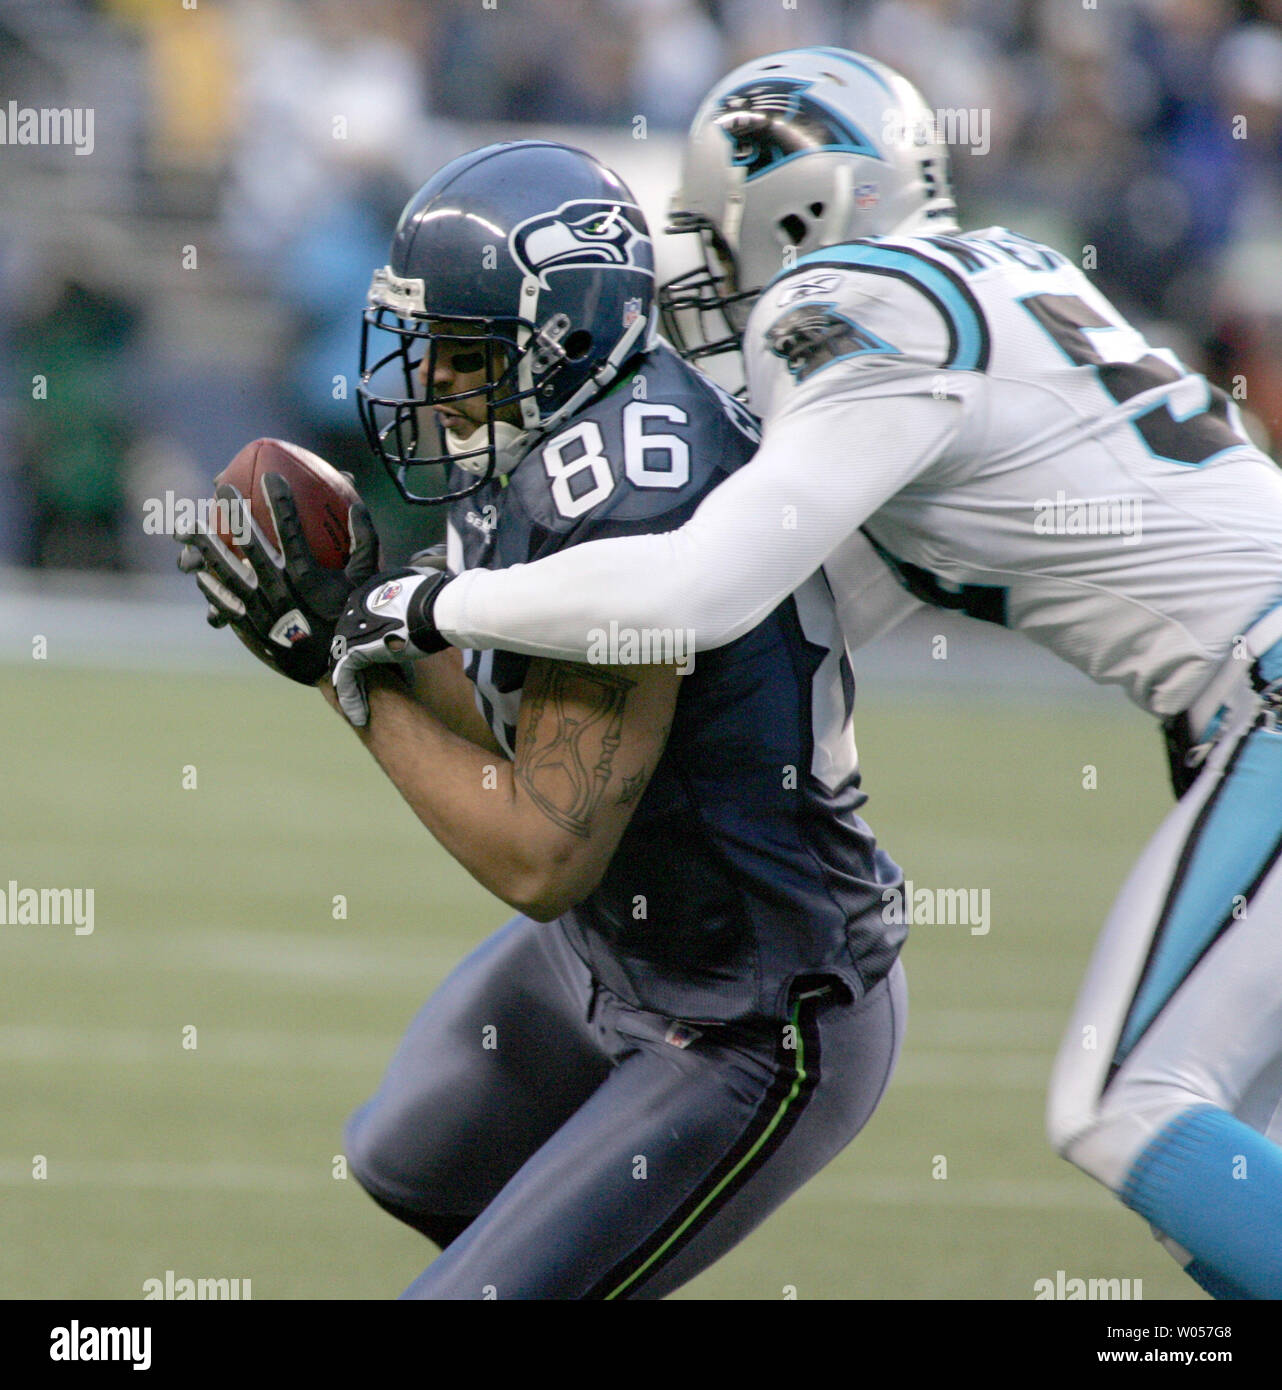 Seattle Seahawks Jerramy Stevens (86) catches a Matt Hasselbeck pass for 13 yards as Carolina Panthers Will Witherspoon defends in the first quarter of the NFC Championship at Qwest Field in Seattle on January 22, 2006.  (UPI Photo/Terry Schmitt) Stock Photo